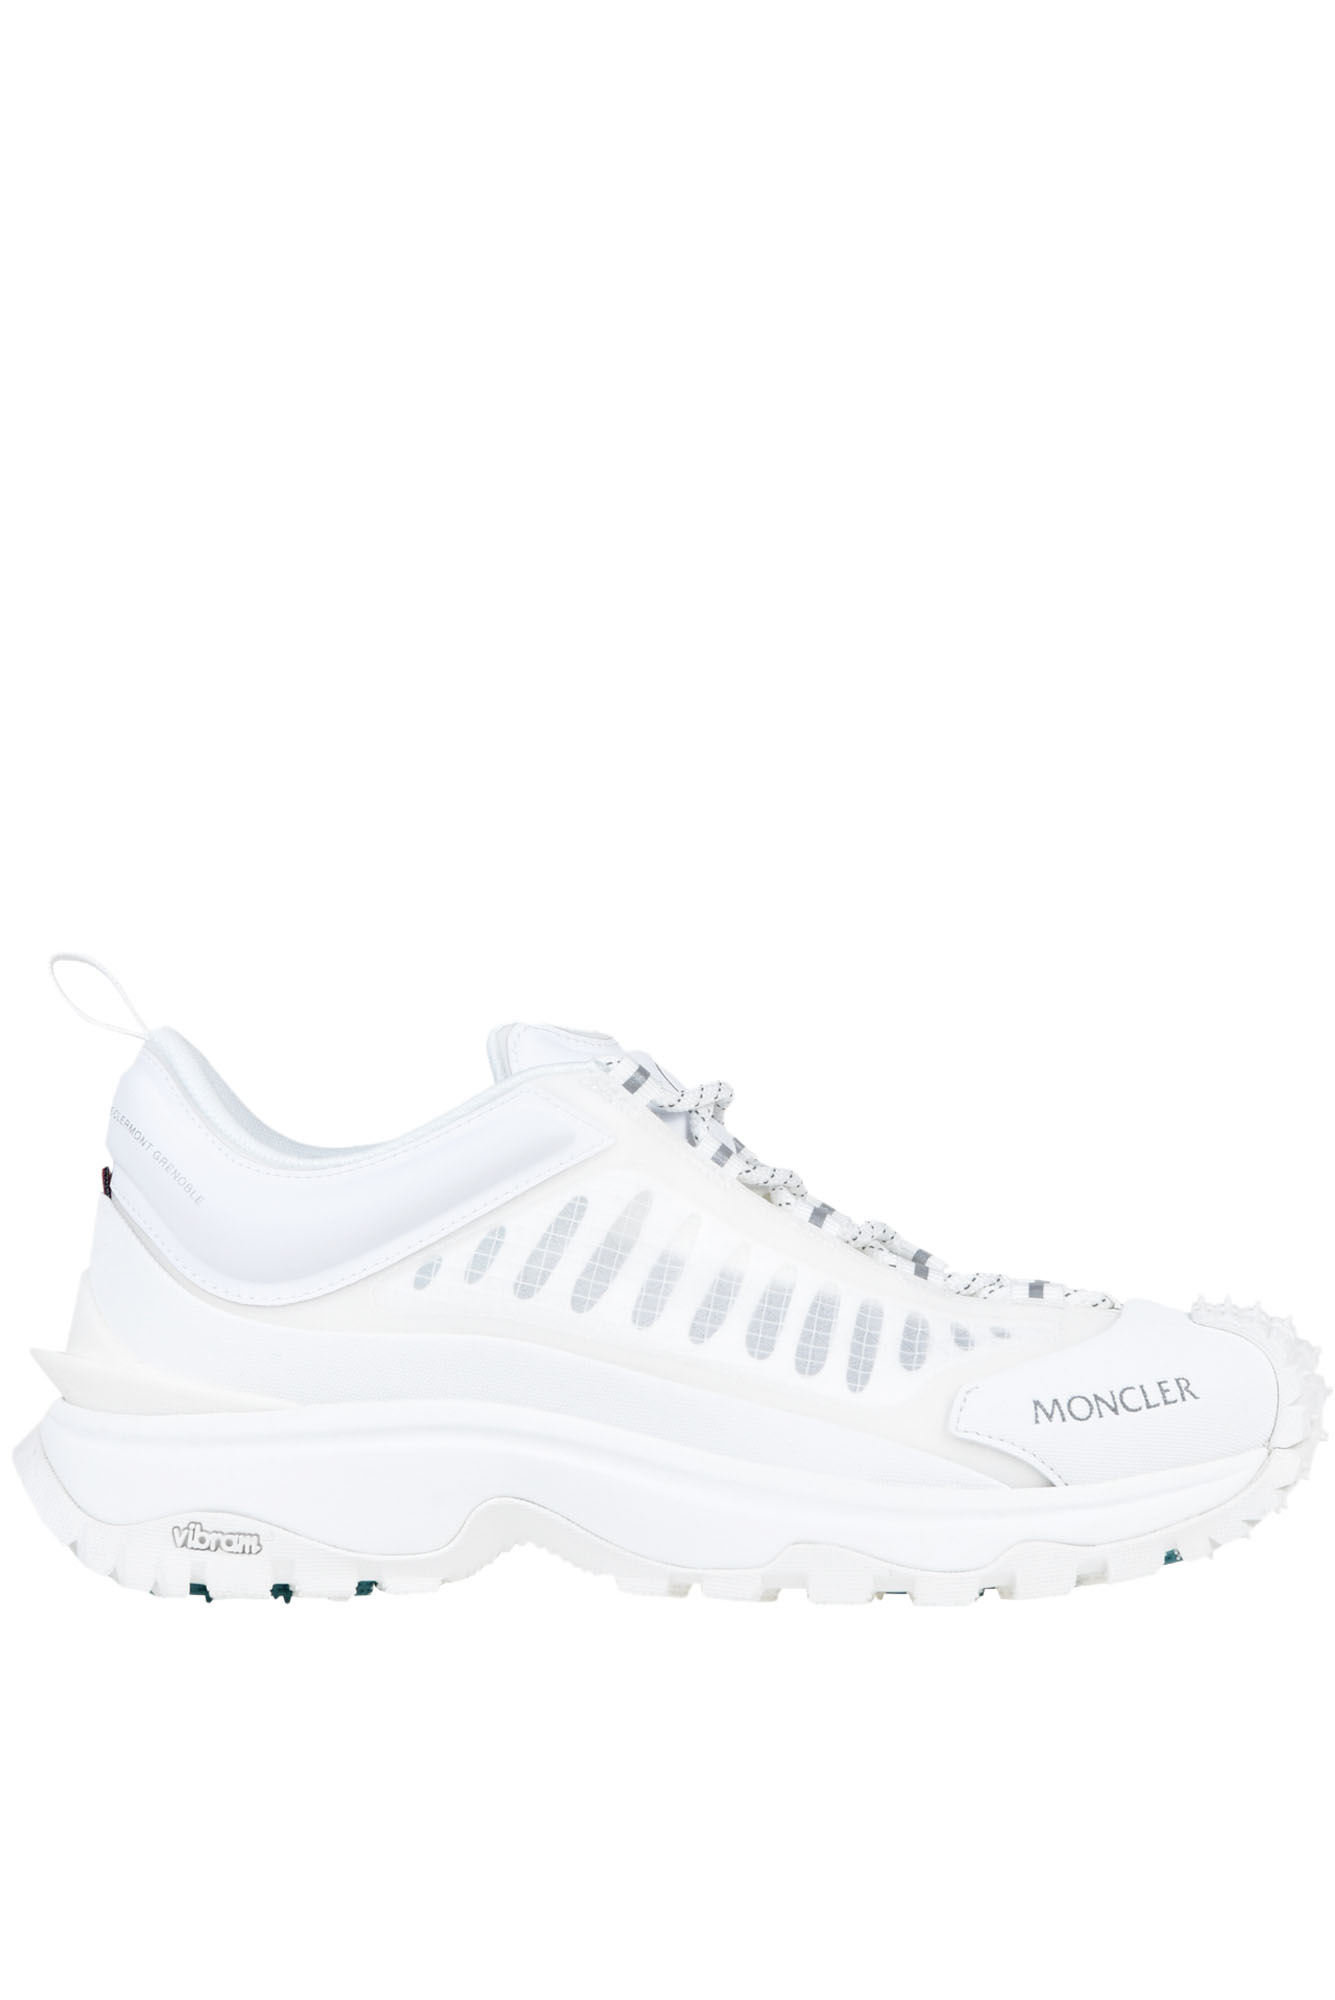 Moncler Trailgrip Lite Sneakers In White